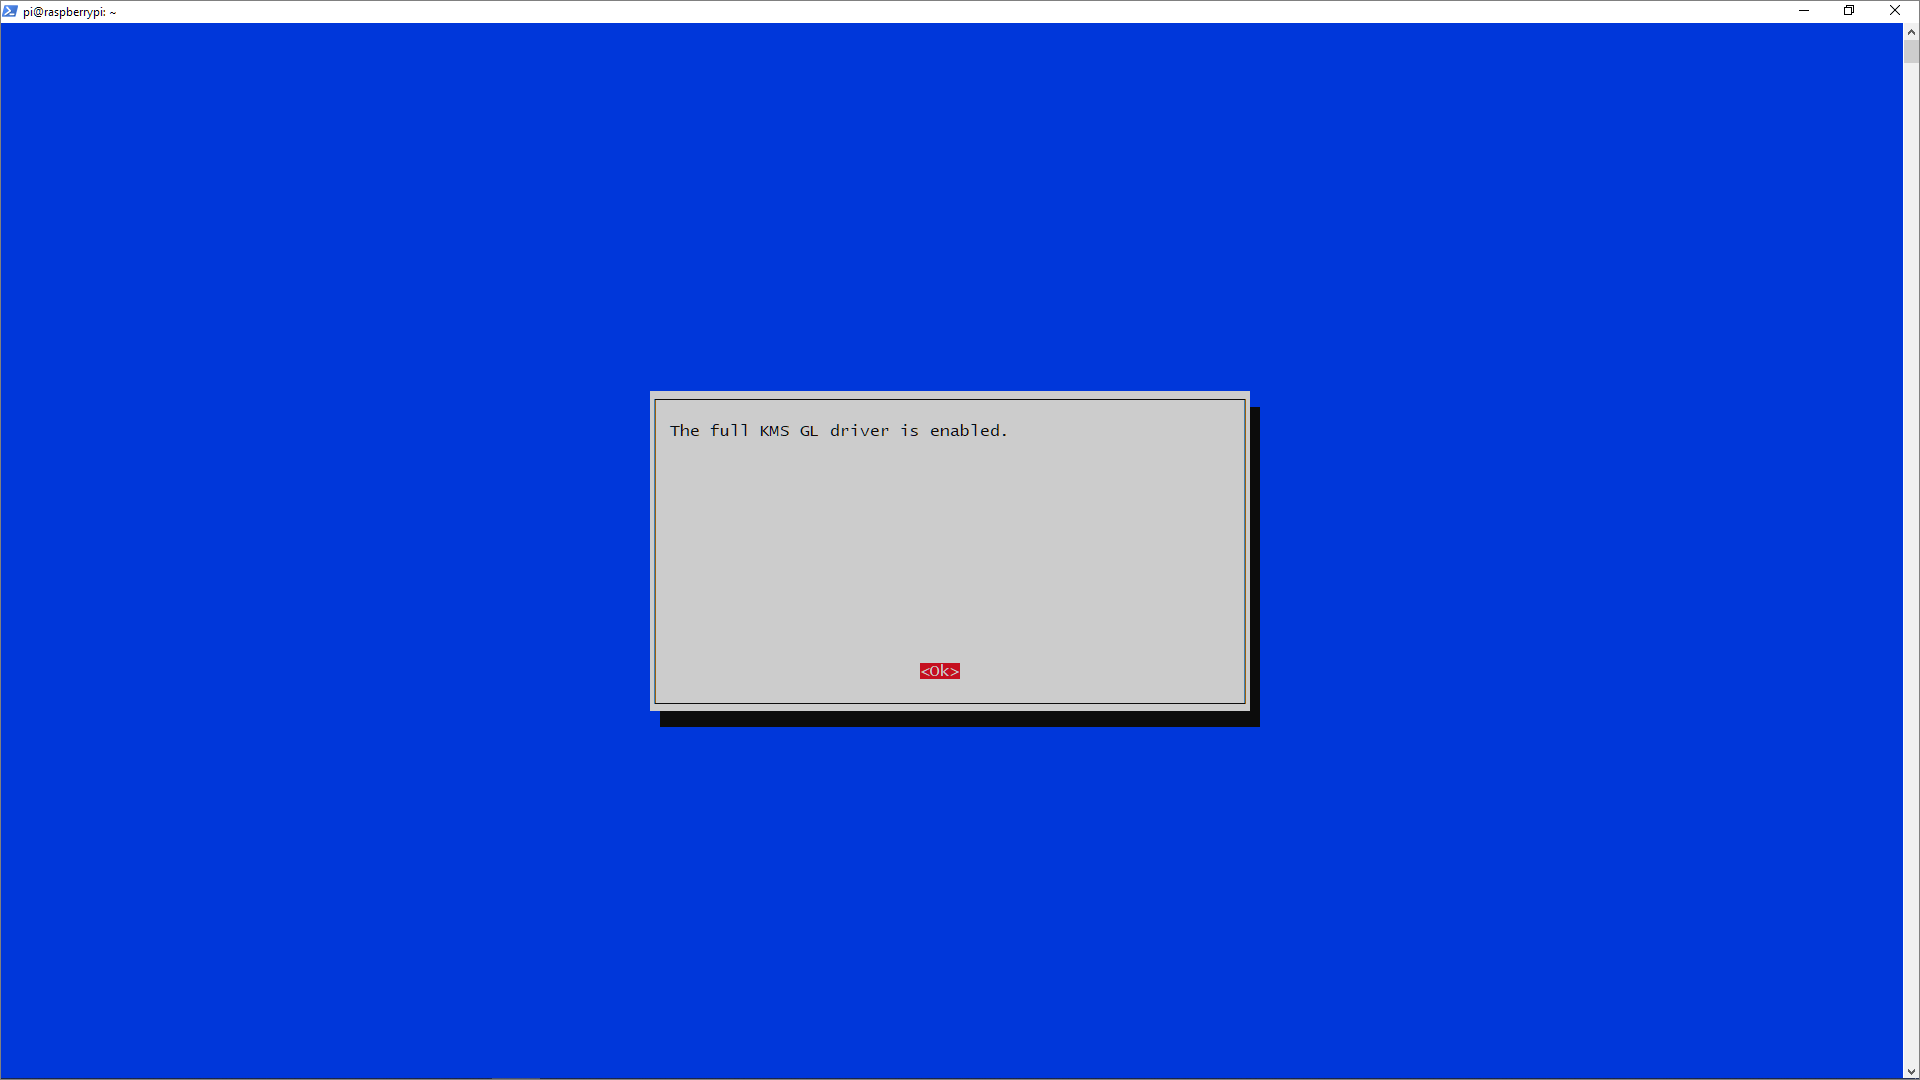 This is a picture of the Raspberry Pi Software Configuration Tool 'Full KMS Driver Enabled' screen.